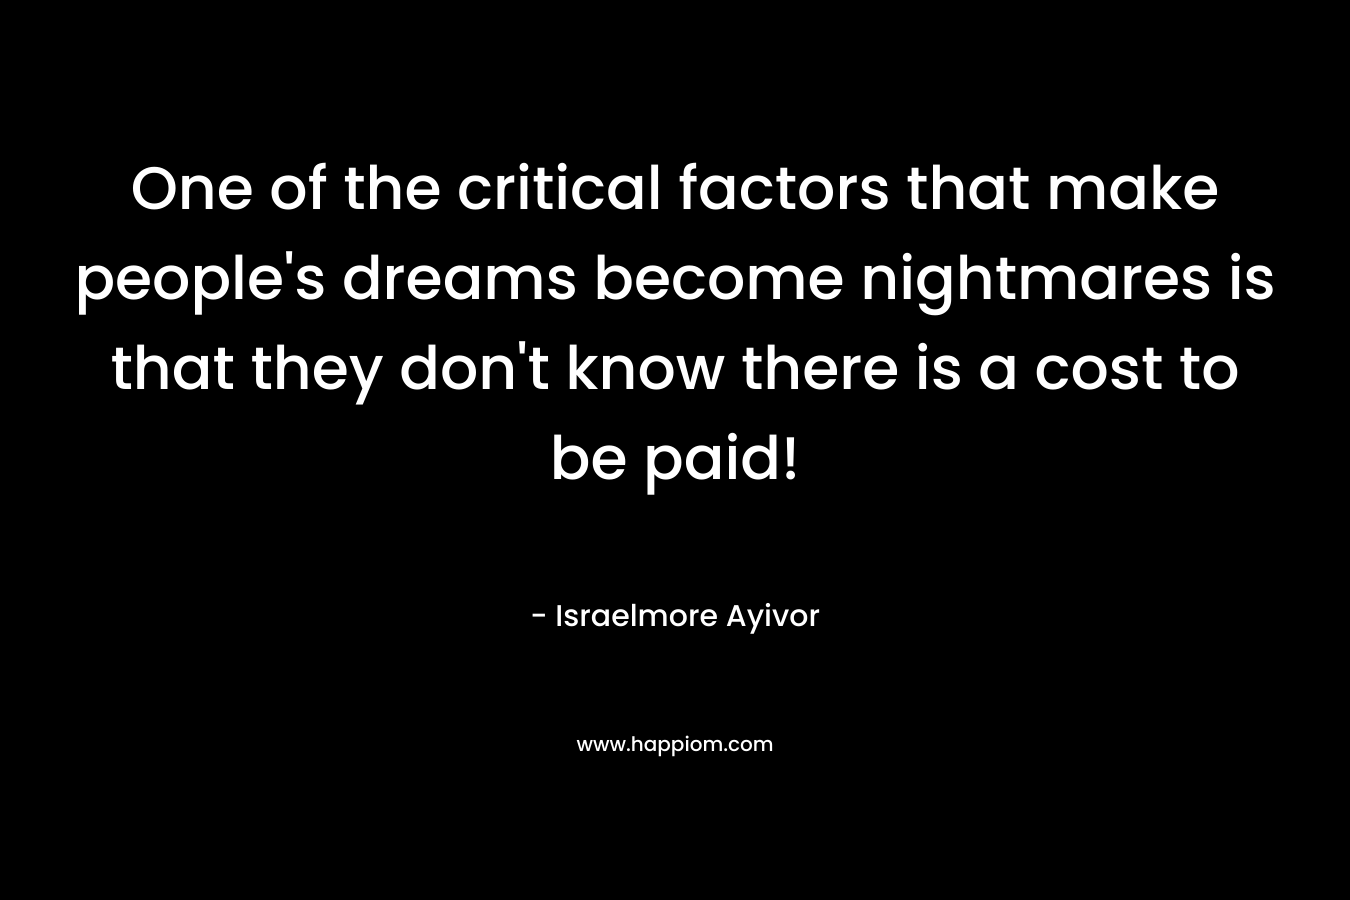 One of the critical factors that make people’s dreams become nightmares is that they don’t know there is a cost to be paid! – Israelmore Ayivor